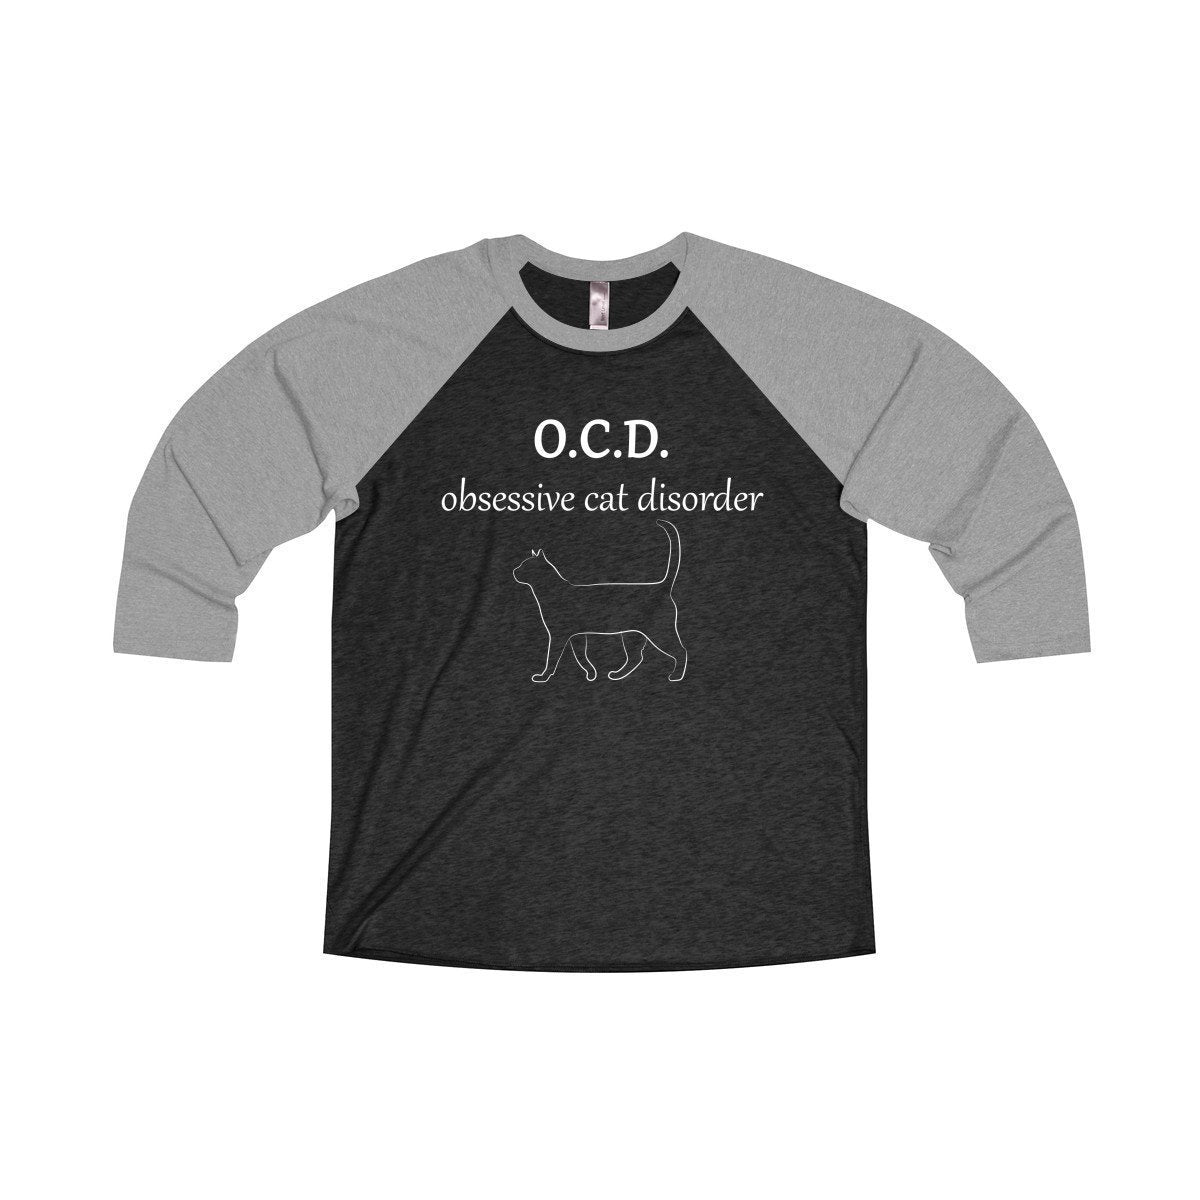 Clothes for Cat Lovers, Cat Shirt Featuring the phrase O.C.D. Obsessive Cat Disorder Printed Across the Front